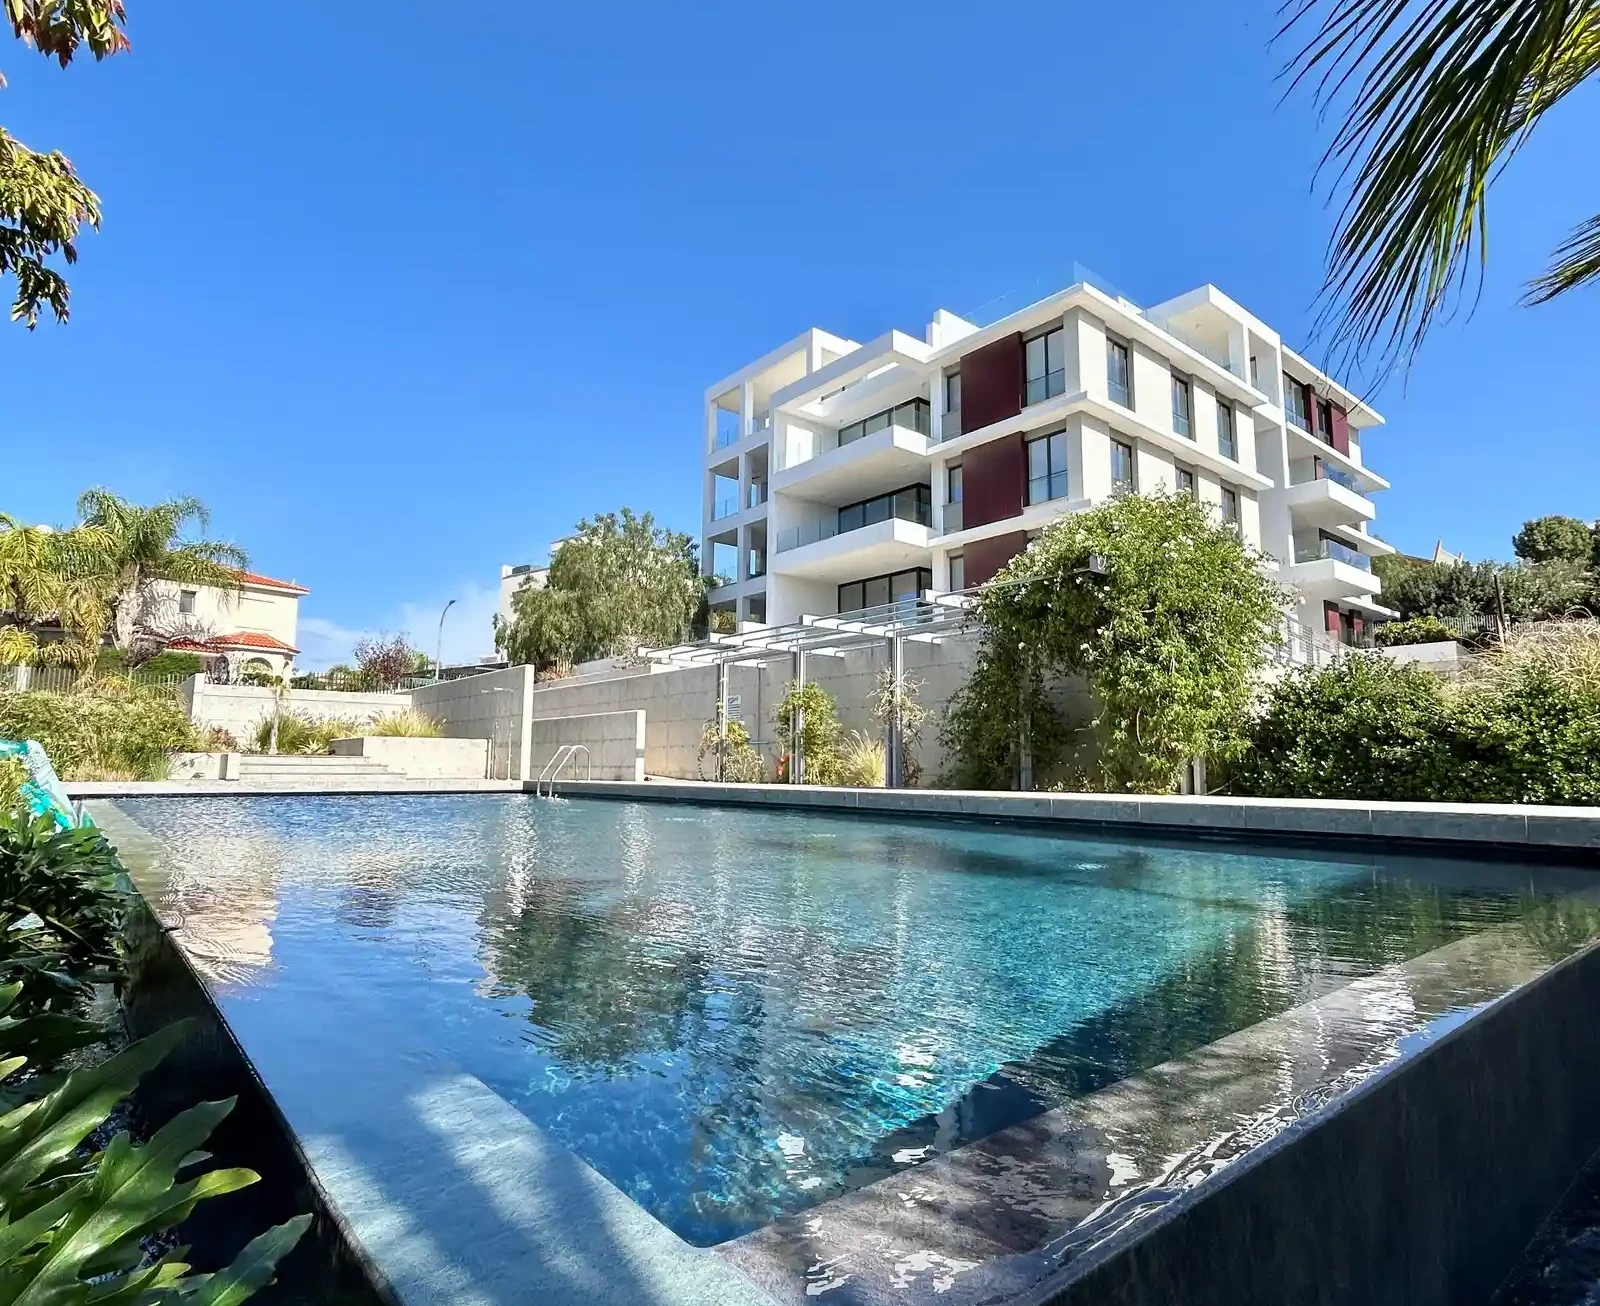 4-bedroom apartment fоr sаle €700.000, image 1